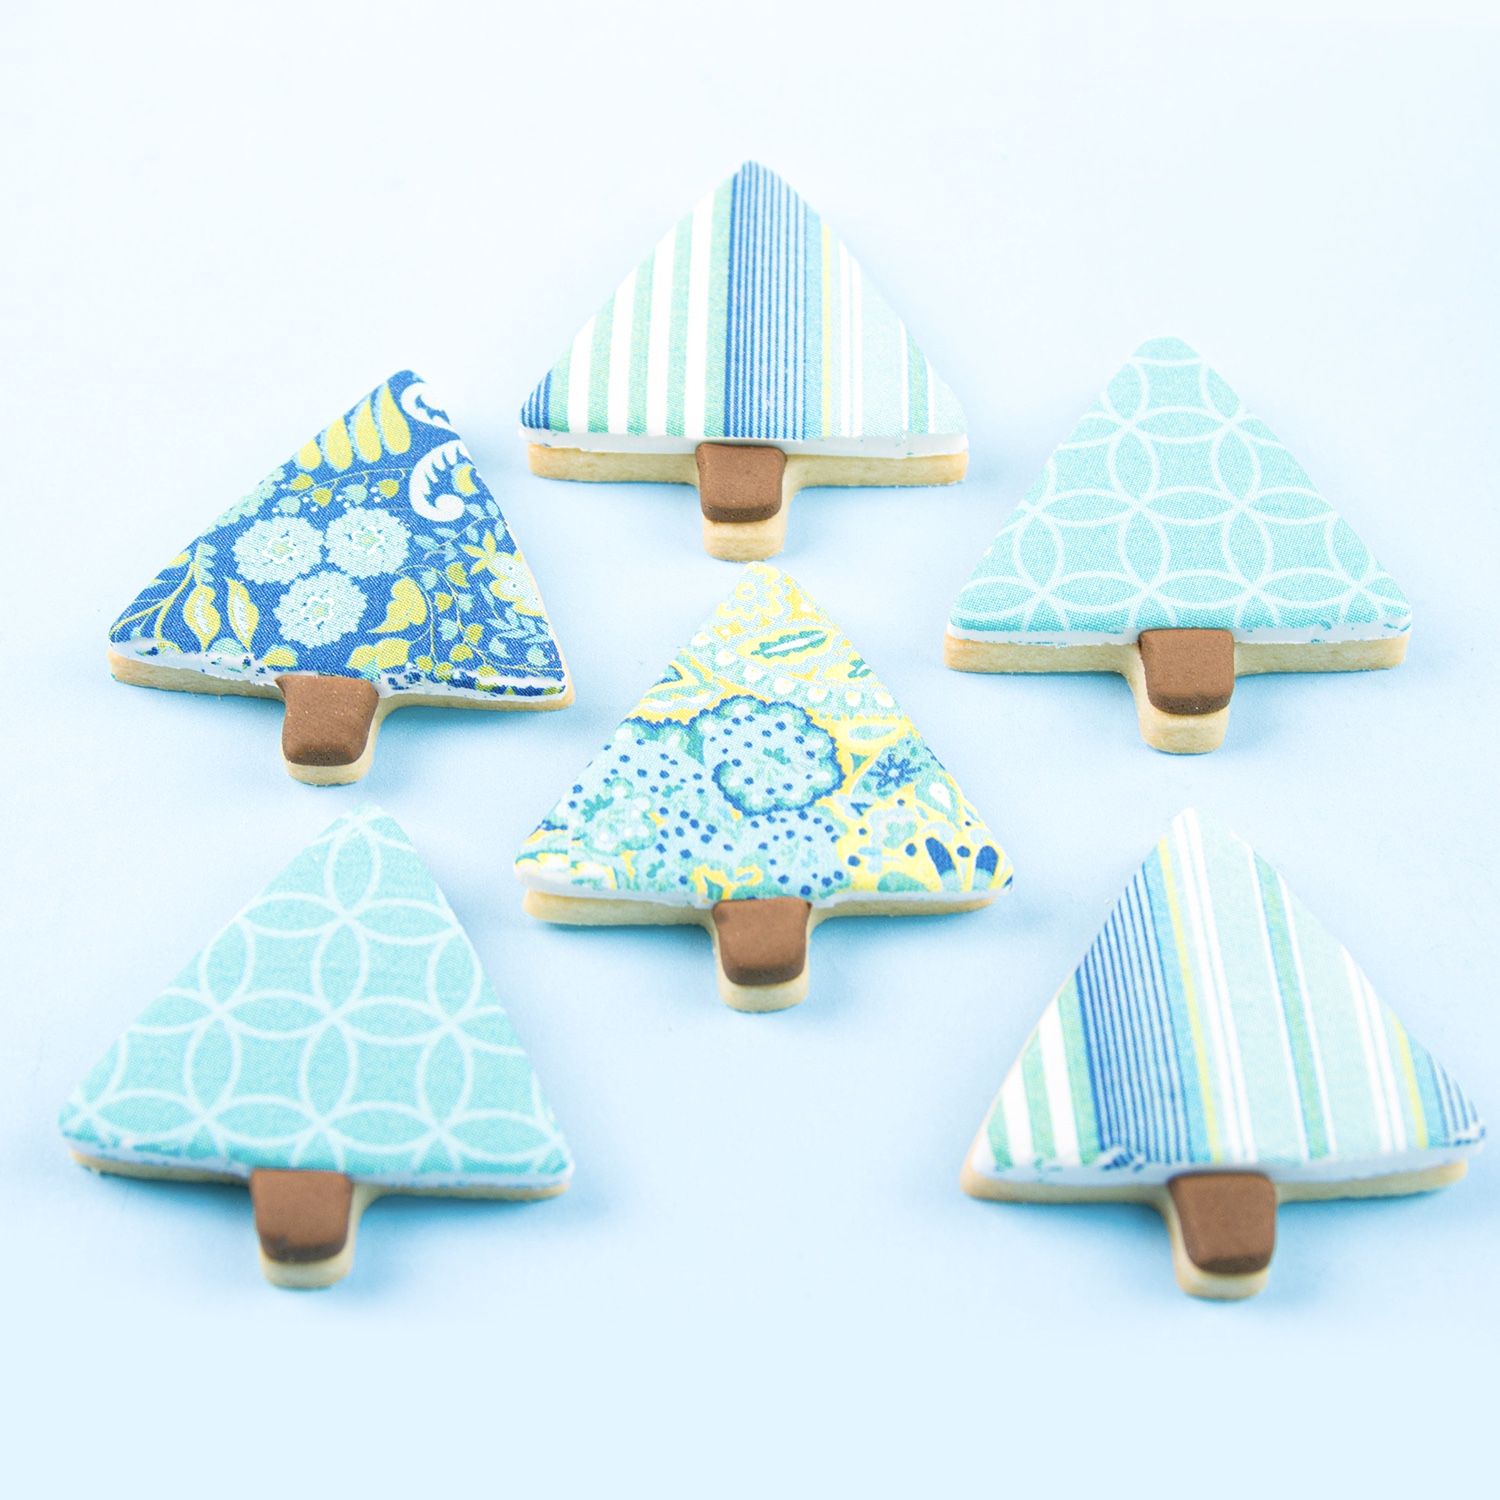 Striped, geometric and floral blue edible image patterned christmas tree cookies